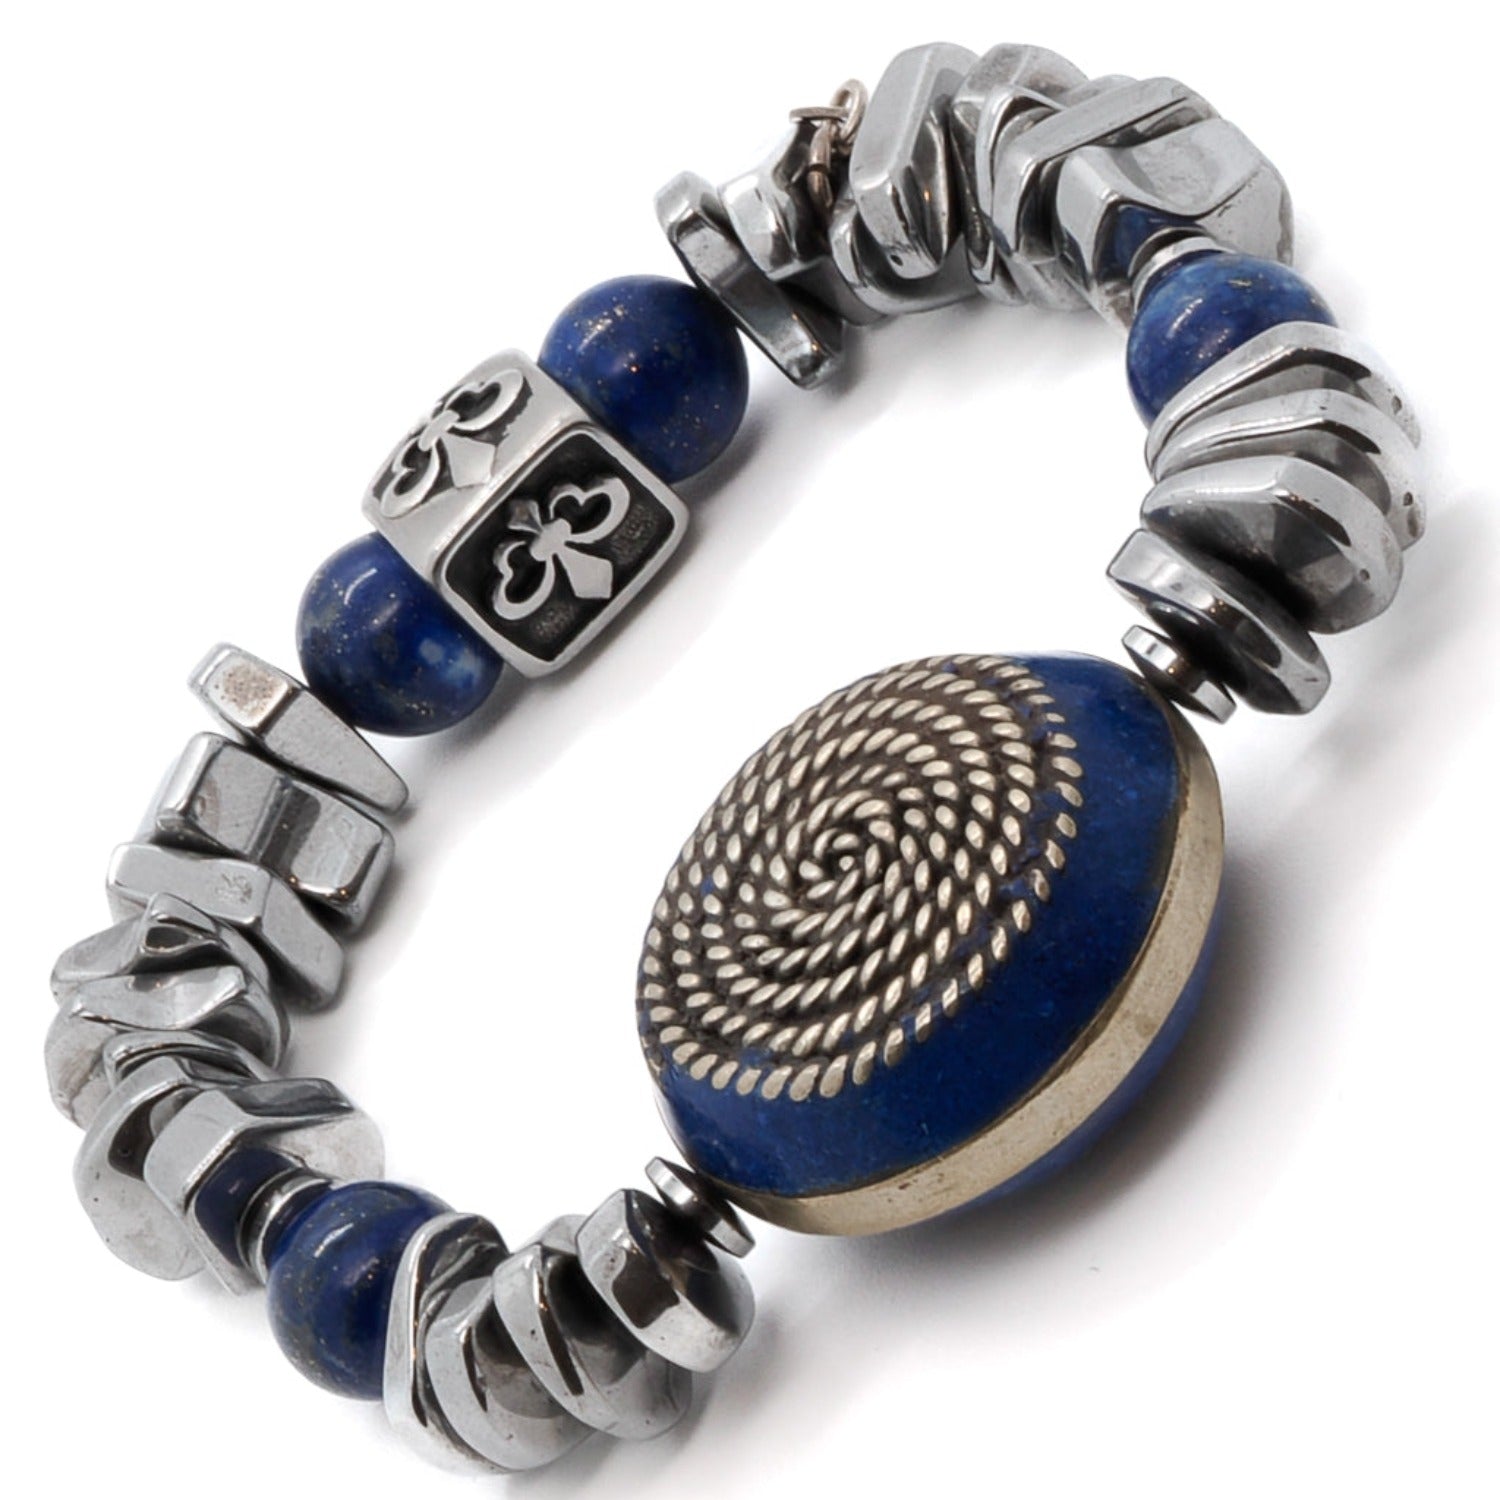 Make a bold statement with the Strong Women Bracelet, a unique accessory crafted with silver hematite stone beads and lapis lazuli beads.